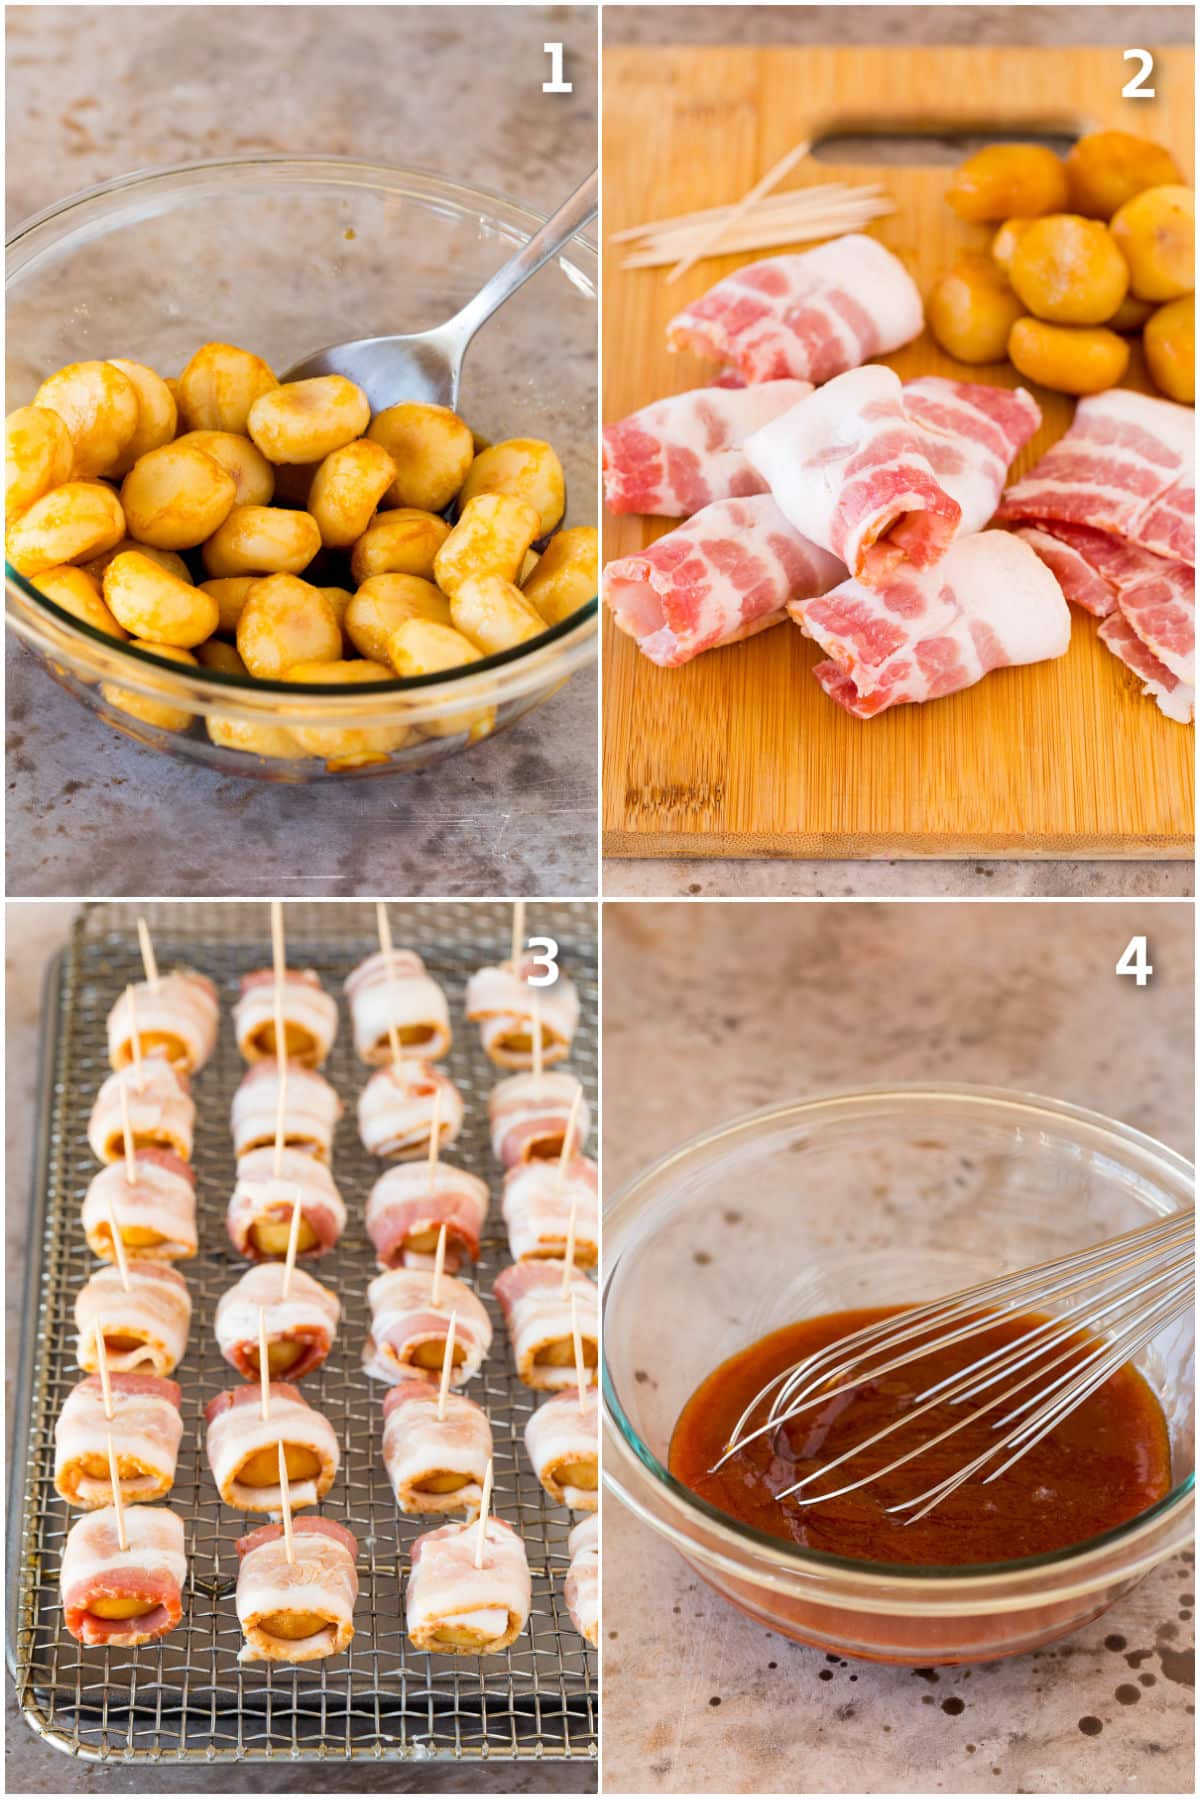 Step by step process shots showing how to prepare bacon wrapped water chestnuts.